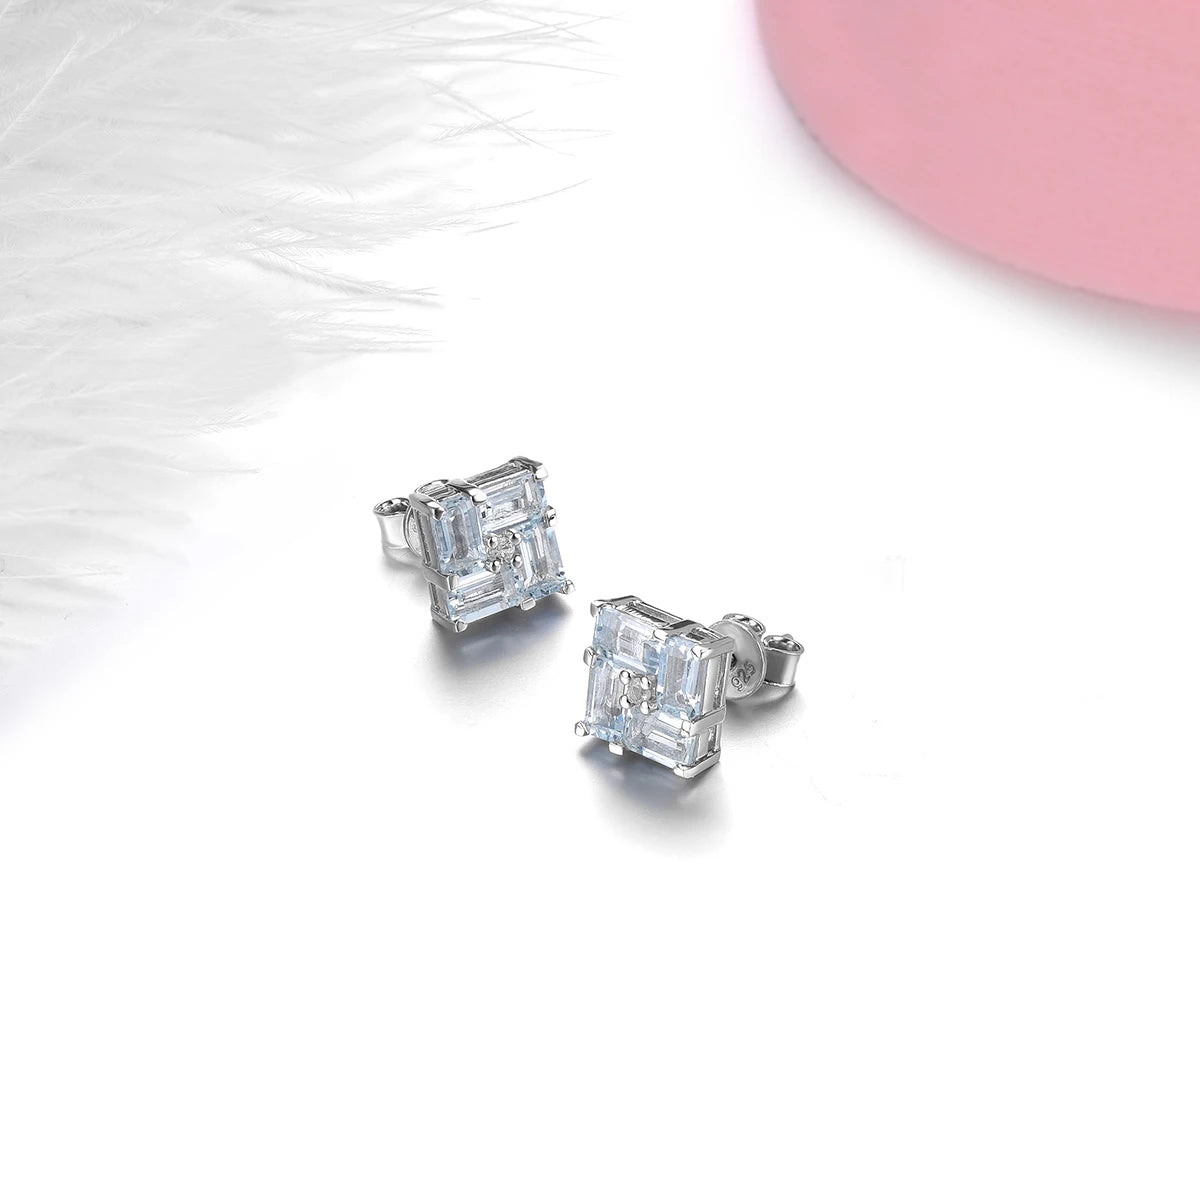 Stock Clearance Genuine Aquamarine Sterling Silver Stud Earrings 2 Carats Light Blue Gemstone Women Exquisite Style S925 Jewelry